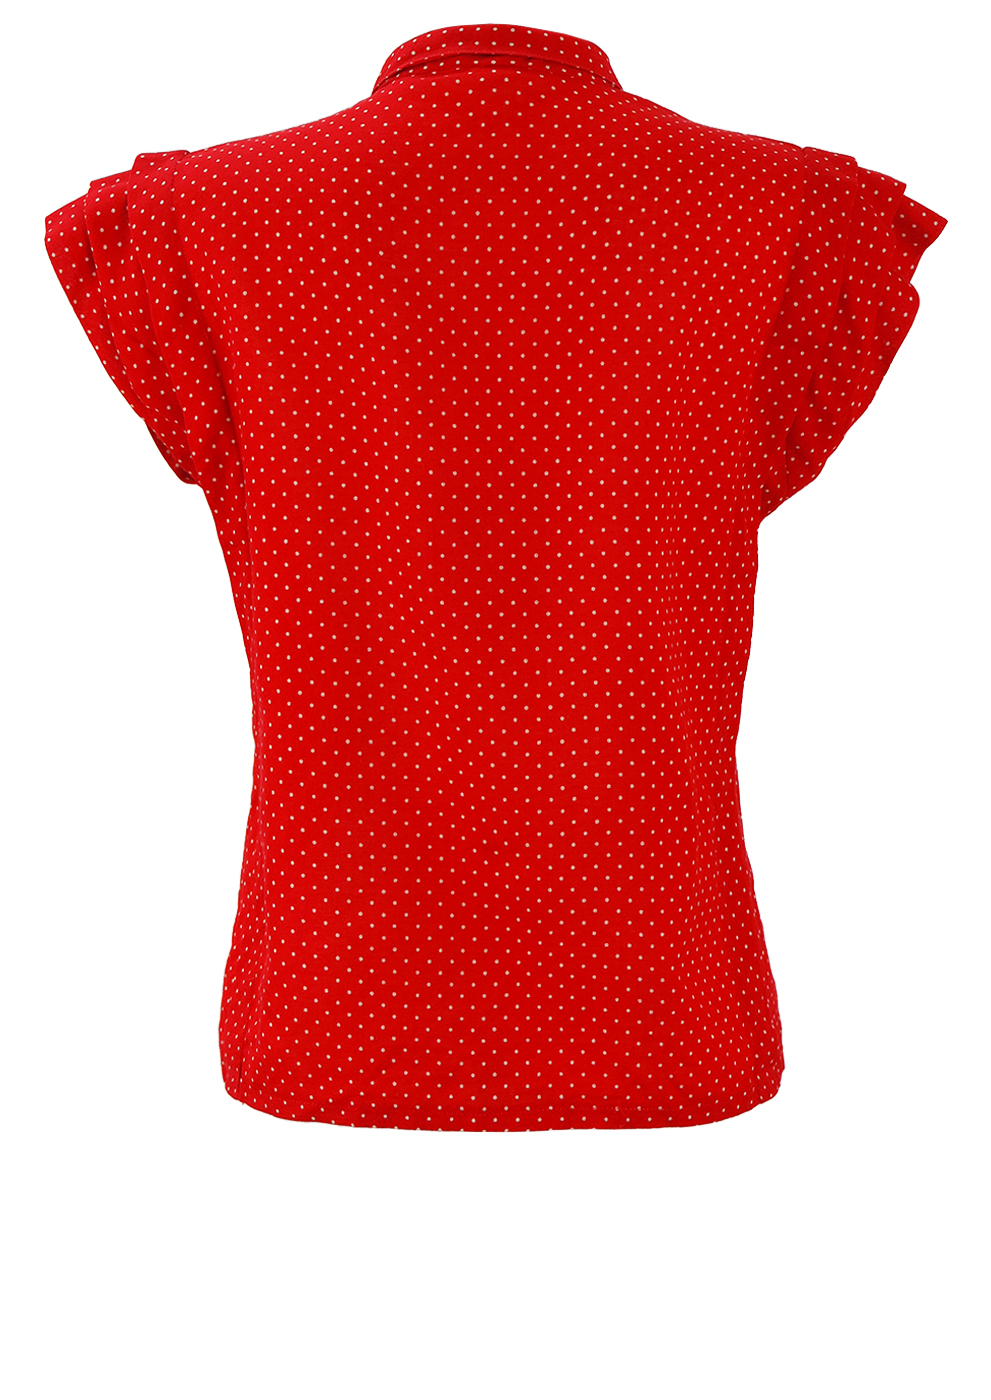 red and white polka dot blouse